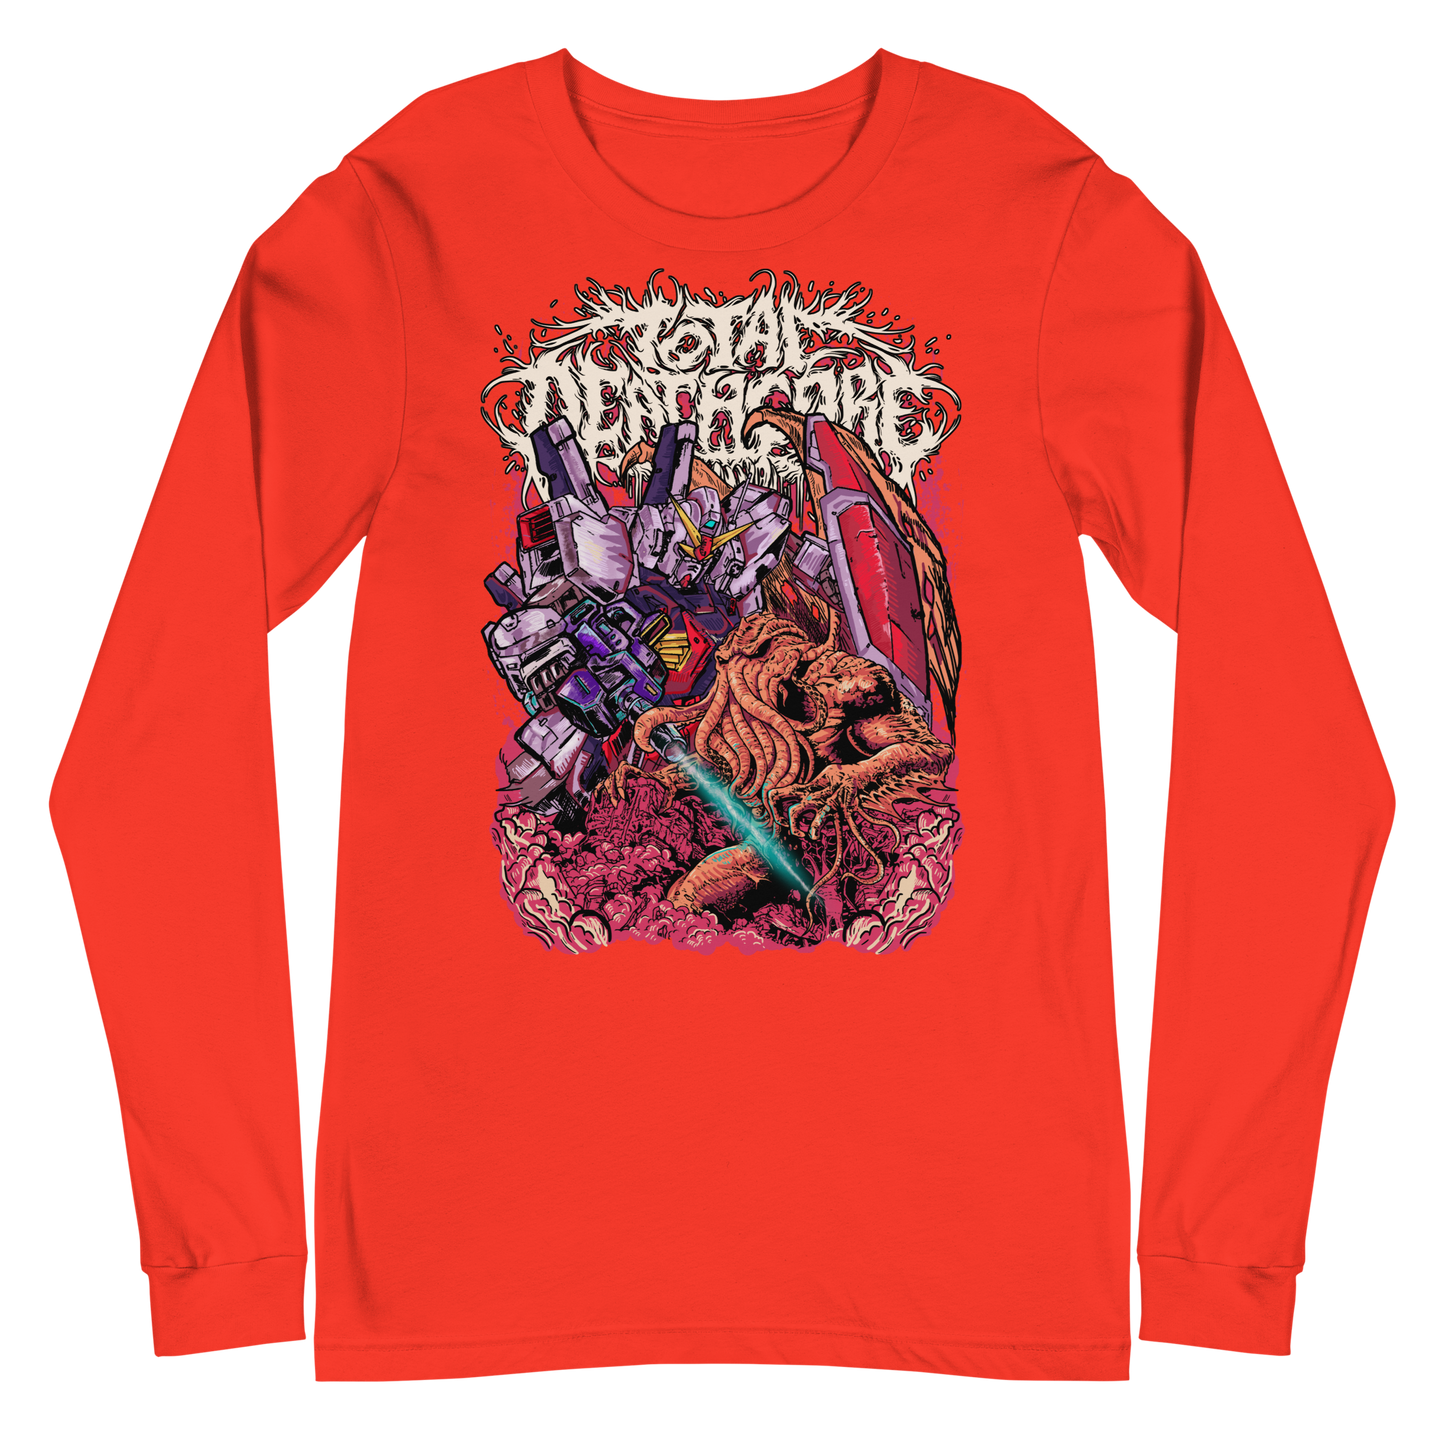 Total Deathcore "Final Fight" - Unisex Long Sleeve Tee